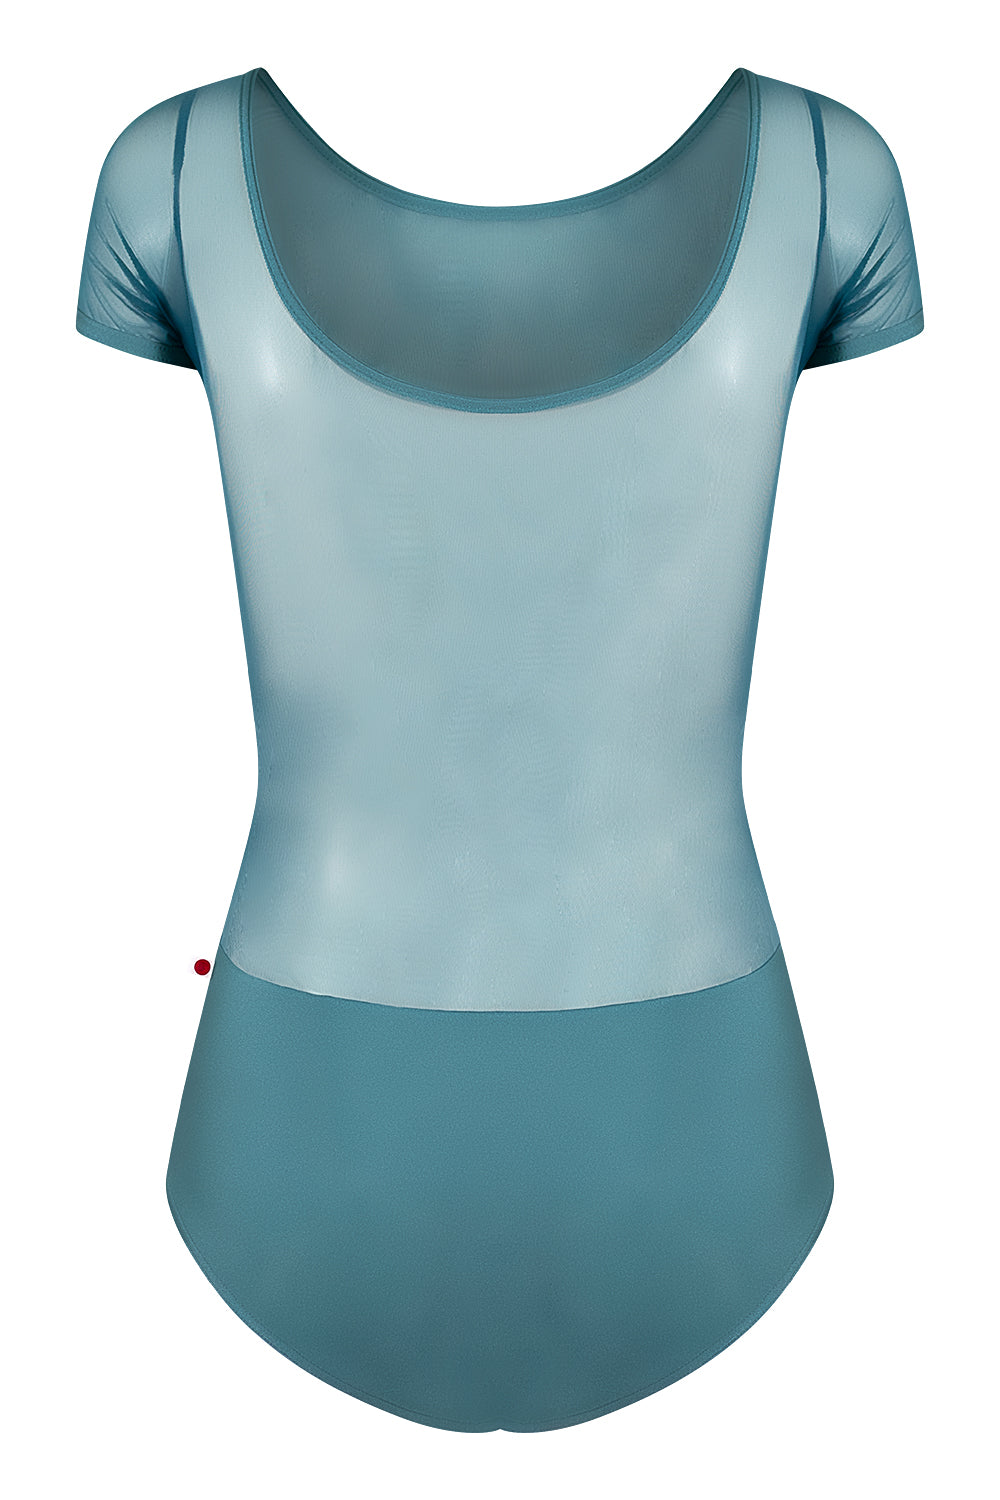 Meagan leotard in N-Frost body color with Mesh Lagoon top & short sleeve color and N-Frost trim color